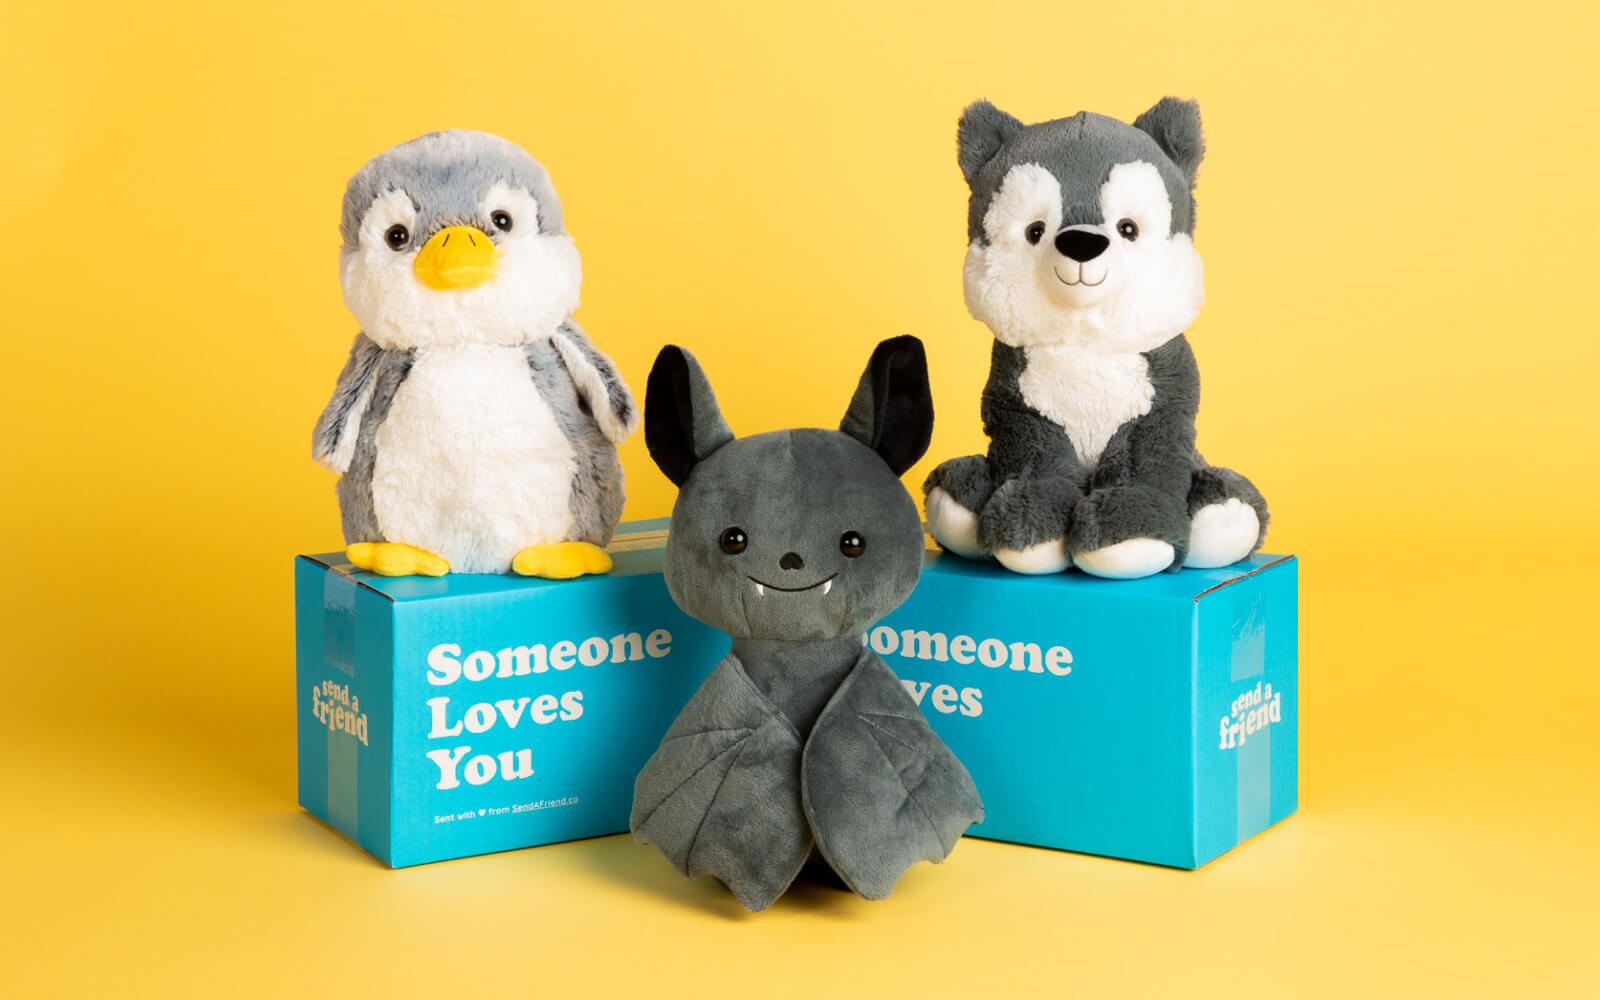 penguin, bat, and wolf stuffed animal care packages